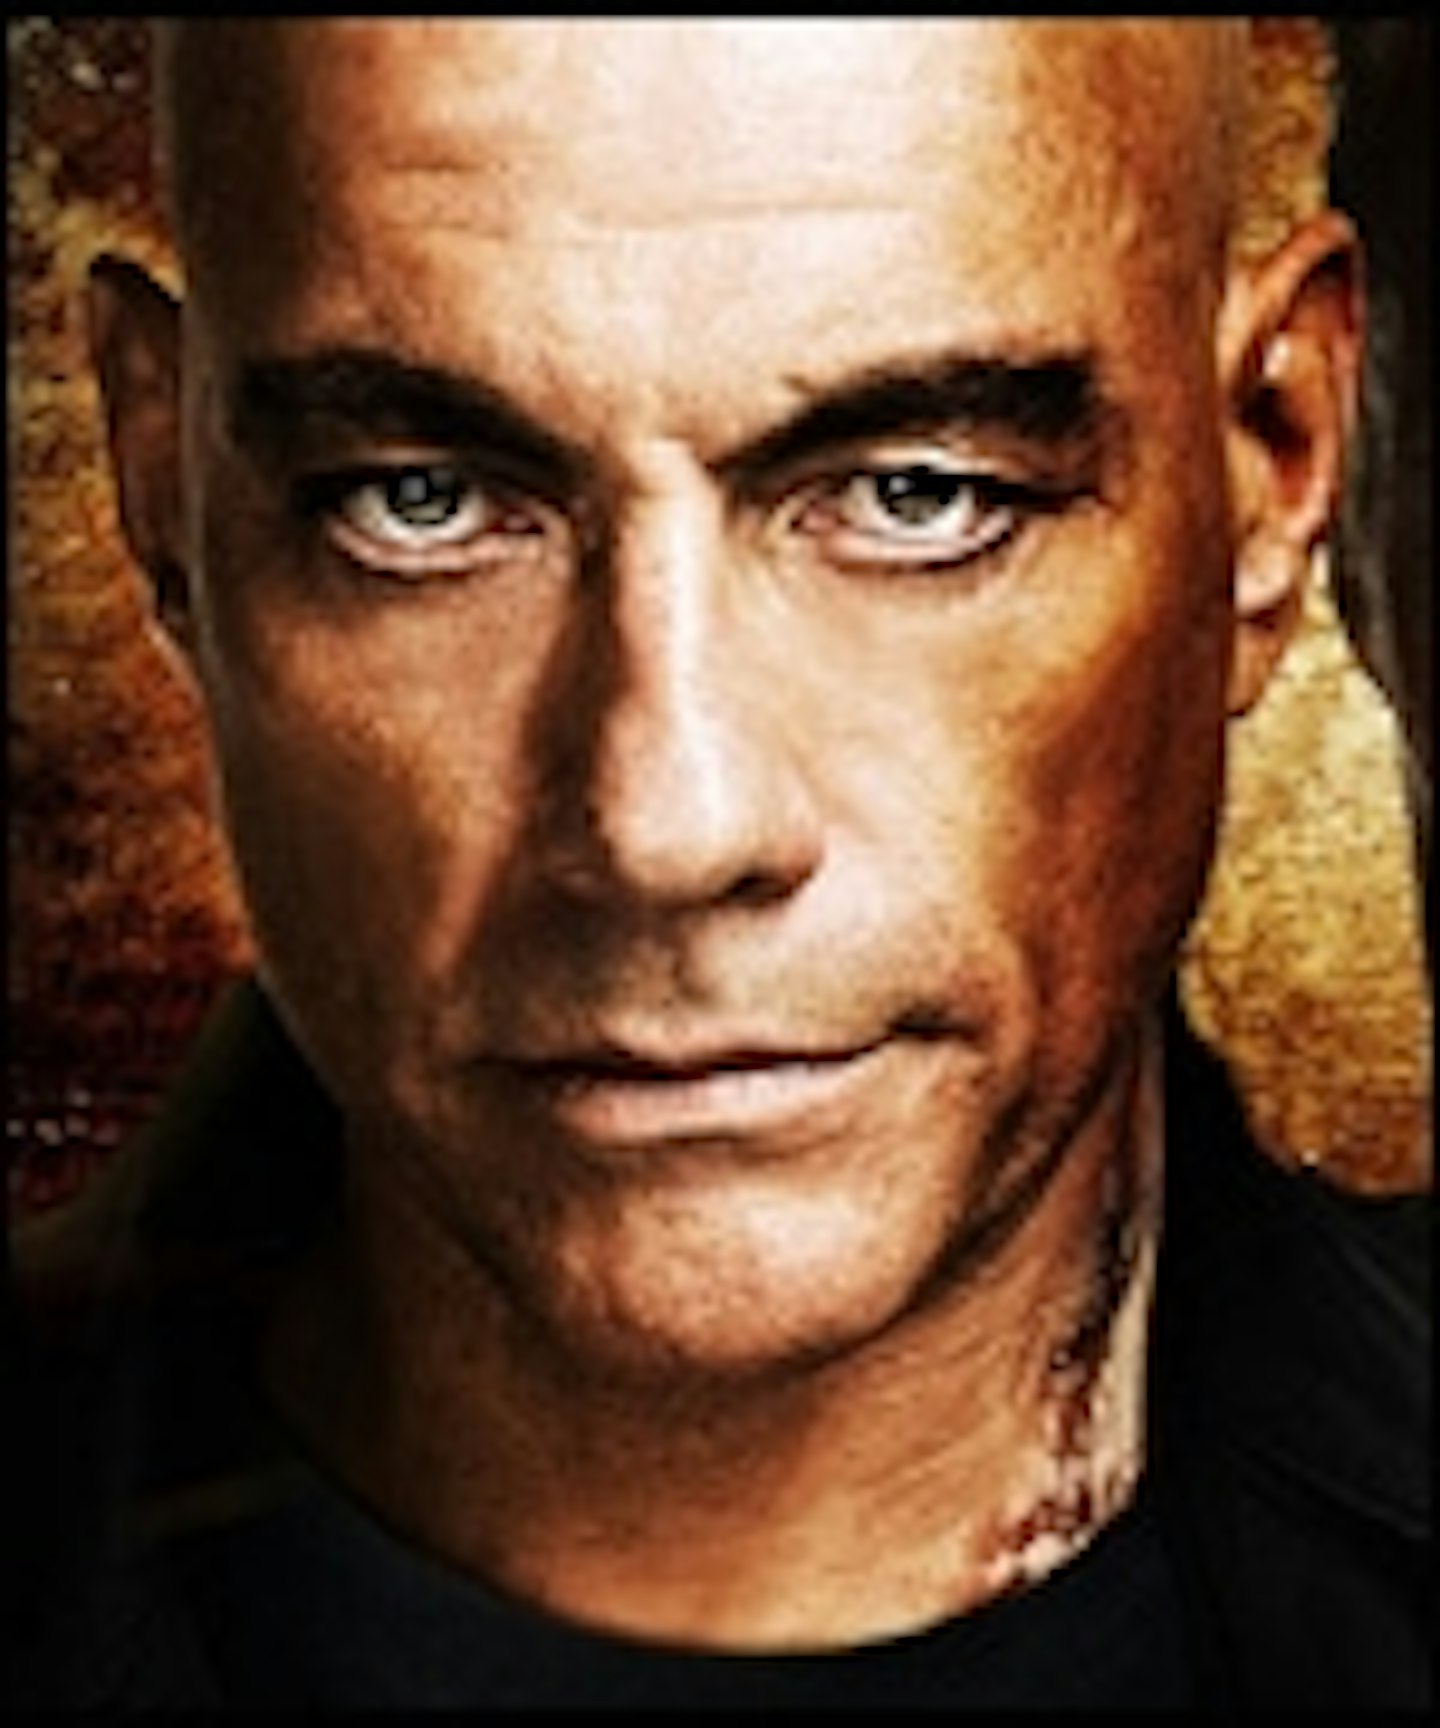 New Universal Soldier Poster Online